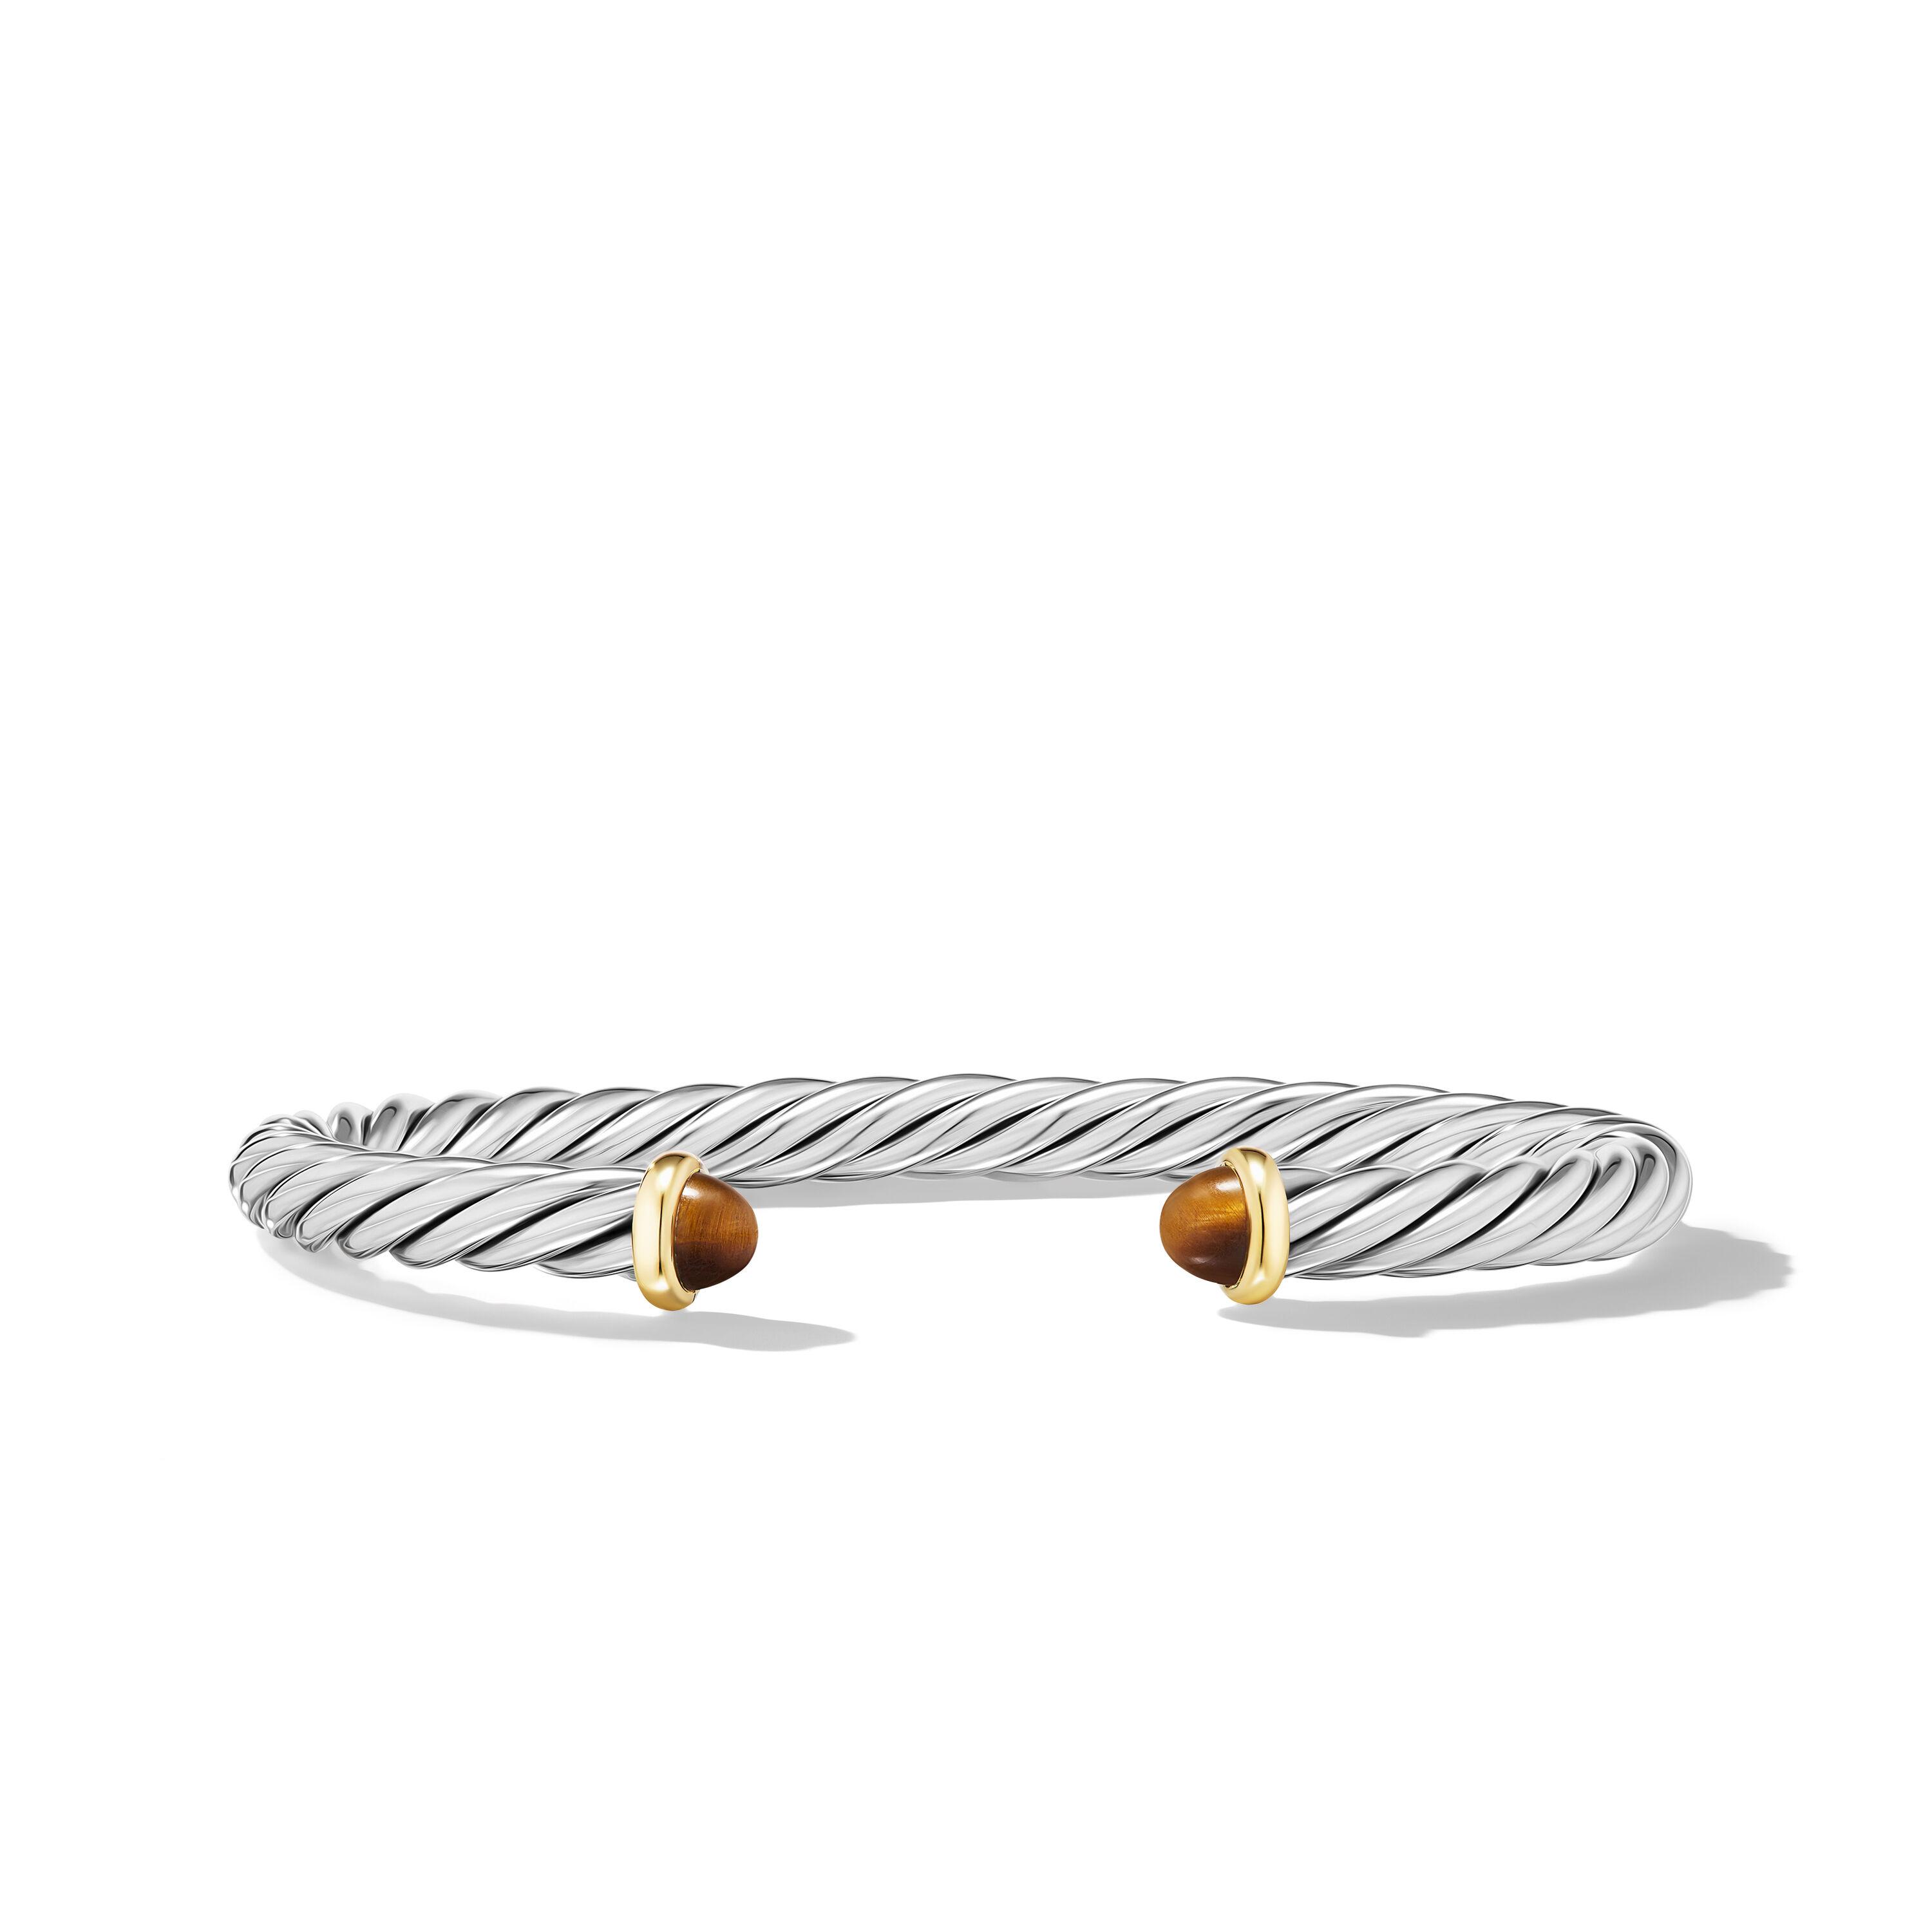 David Yurman 6mm Cable Cuff Bracelet in Sterling Silver with 14K Yellow Gold and Tiger's Eye, Medium 0